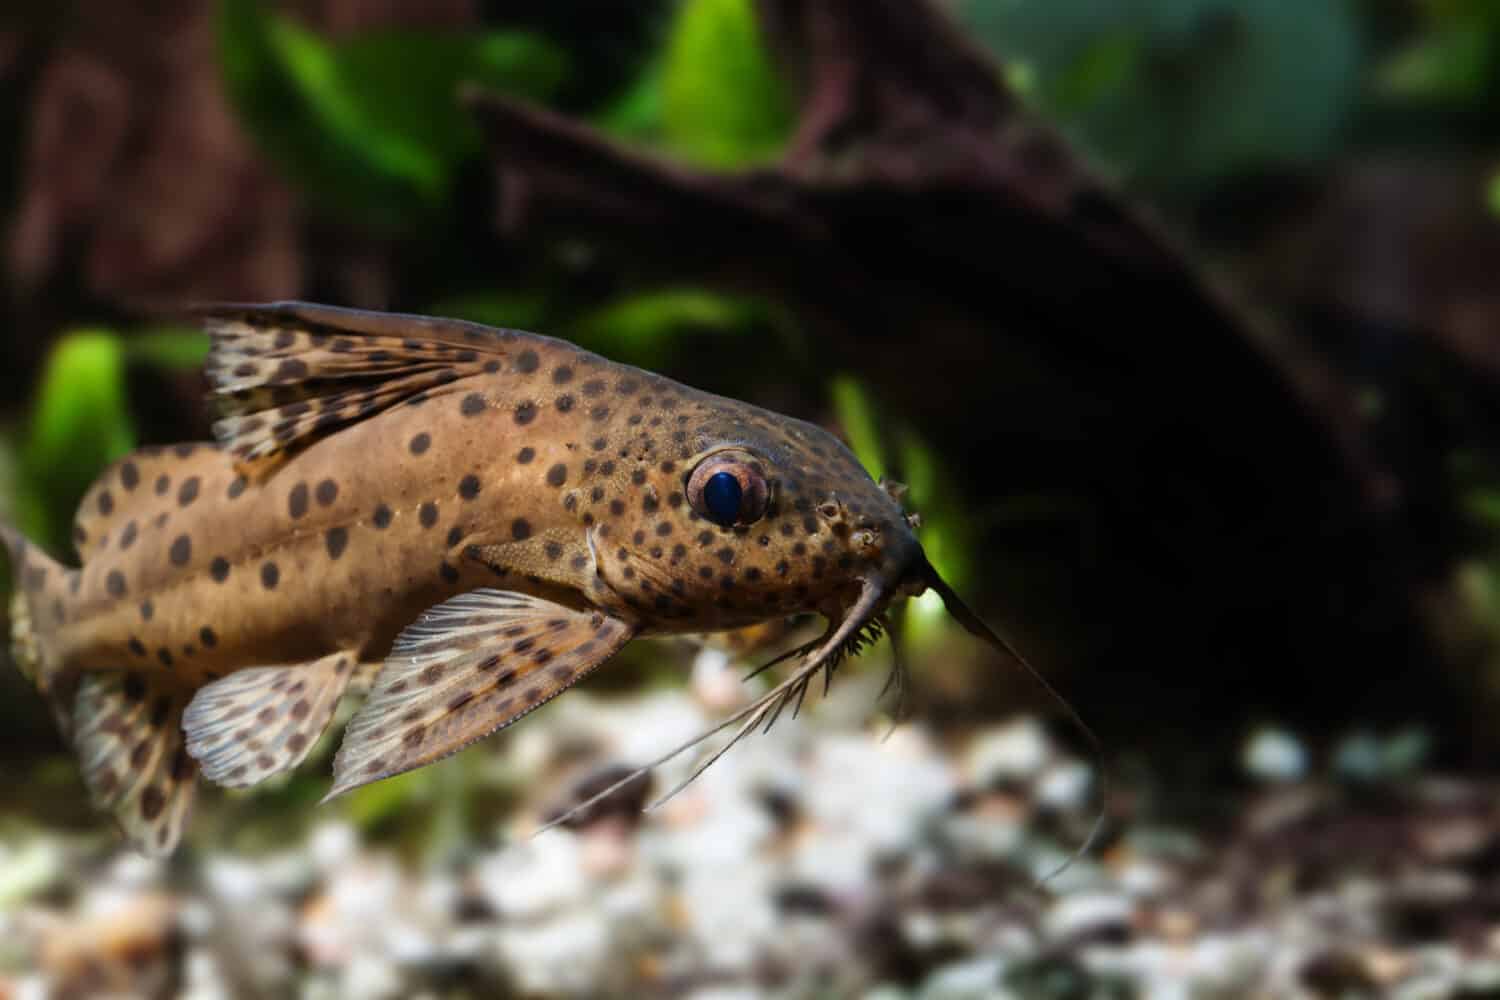 Catfish three pair of barbels macro view. Synodontis nigriventris blotched upside-down african predator fish, brown skin camouflage. Shallow depth of field photo.